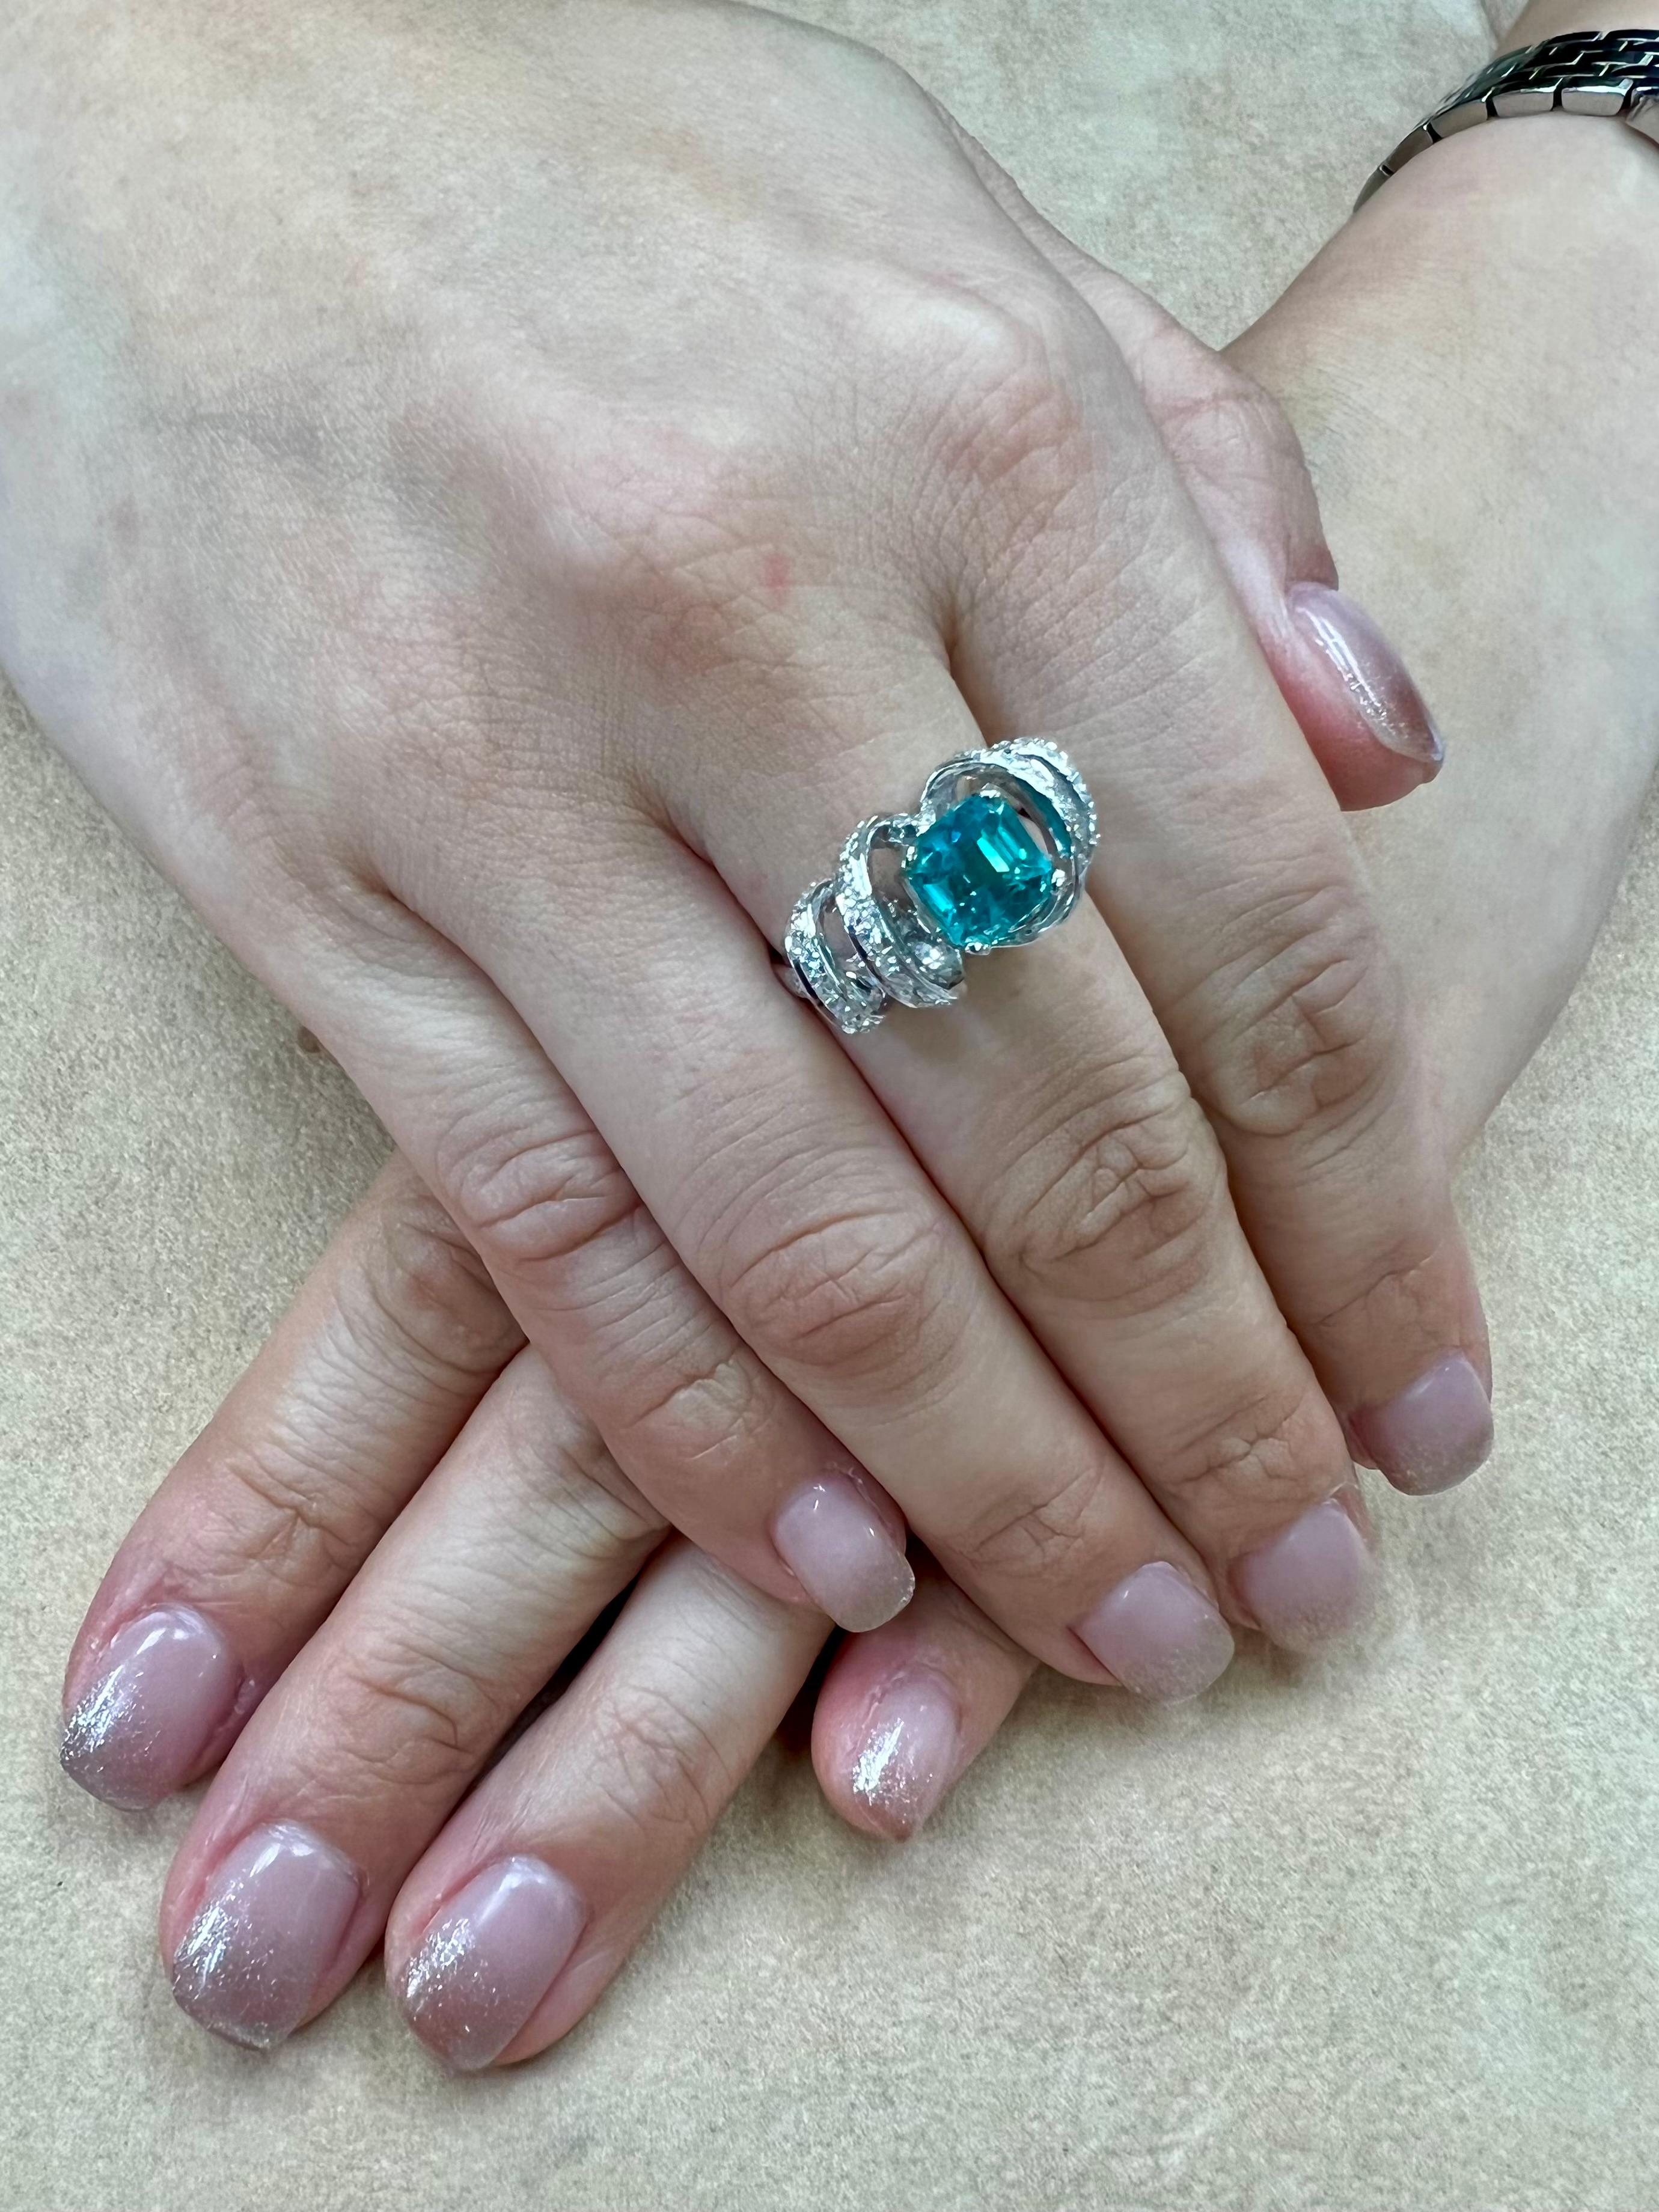 Please check out the HD video! Here is a super unique Apatite and diamond ring. It is set in 18k white gold and diamonds. The 2.40 cts center Apatite is stunning. The beautiful blue green color is very eye pleasing. Please refer to the video. This